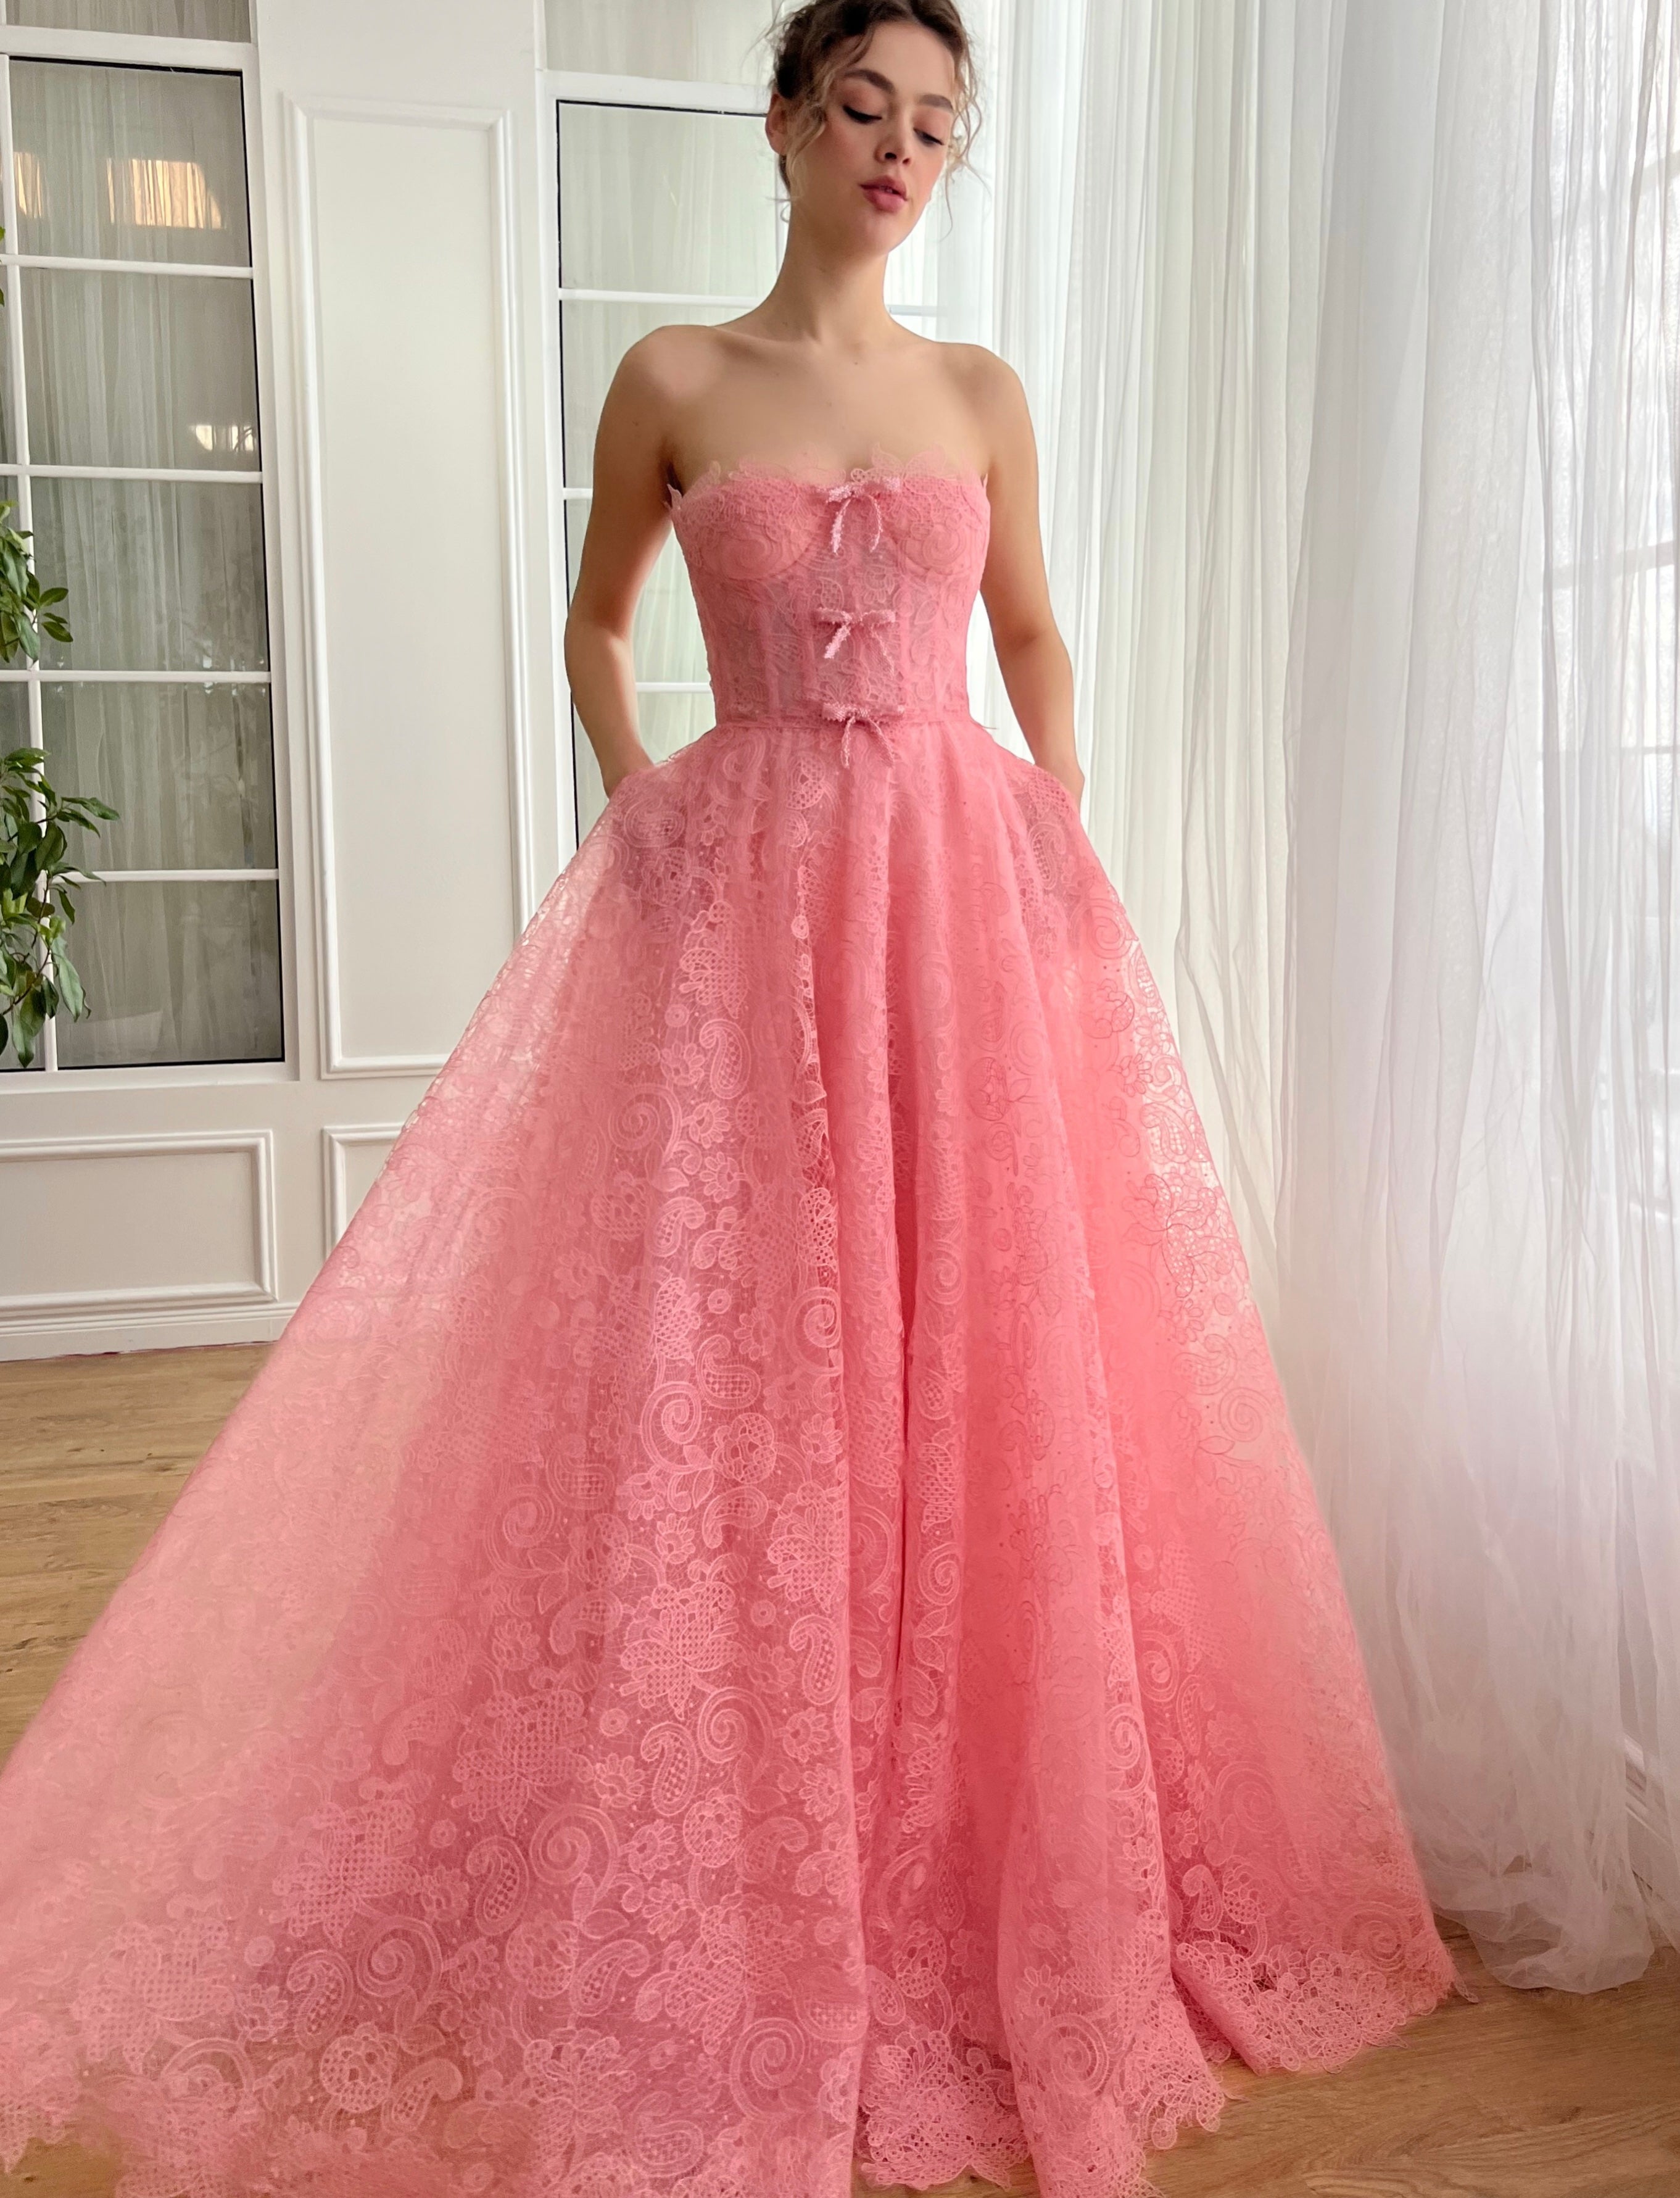 Rose gold or pink beaded bodice cap sleeves sparkle ball gown wedding dress  with short train & glitter tulle - various styles